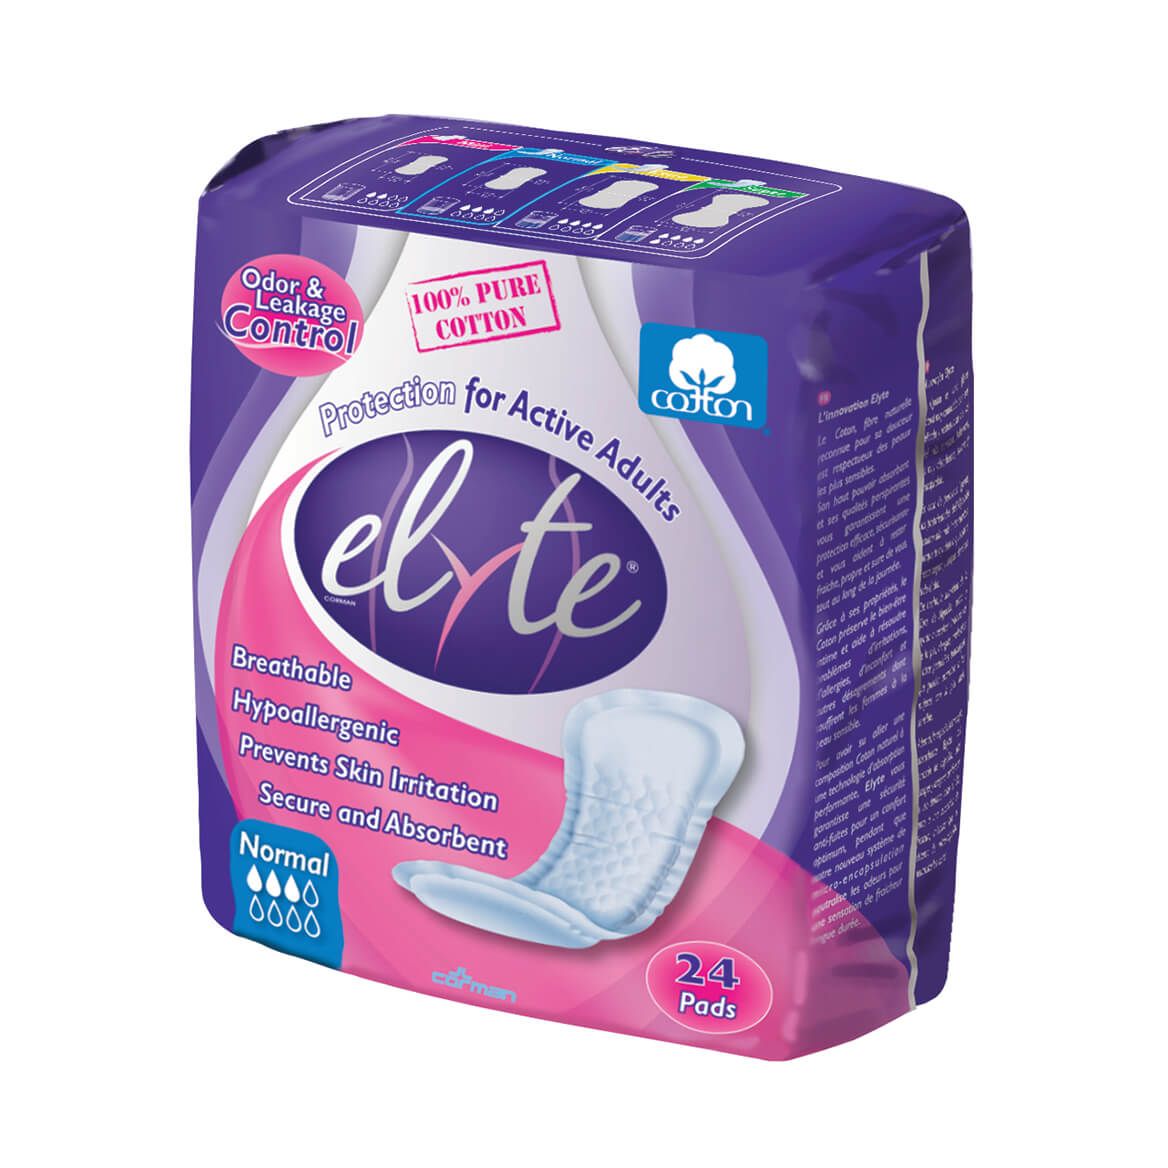 Elyte Incontinence Pads Normal + '-' + 333027